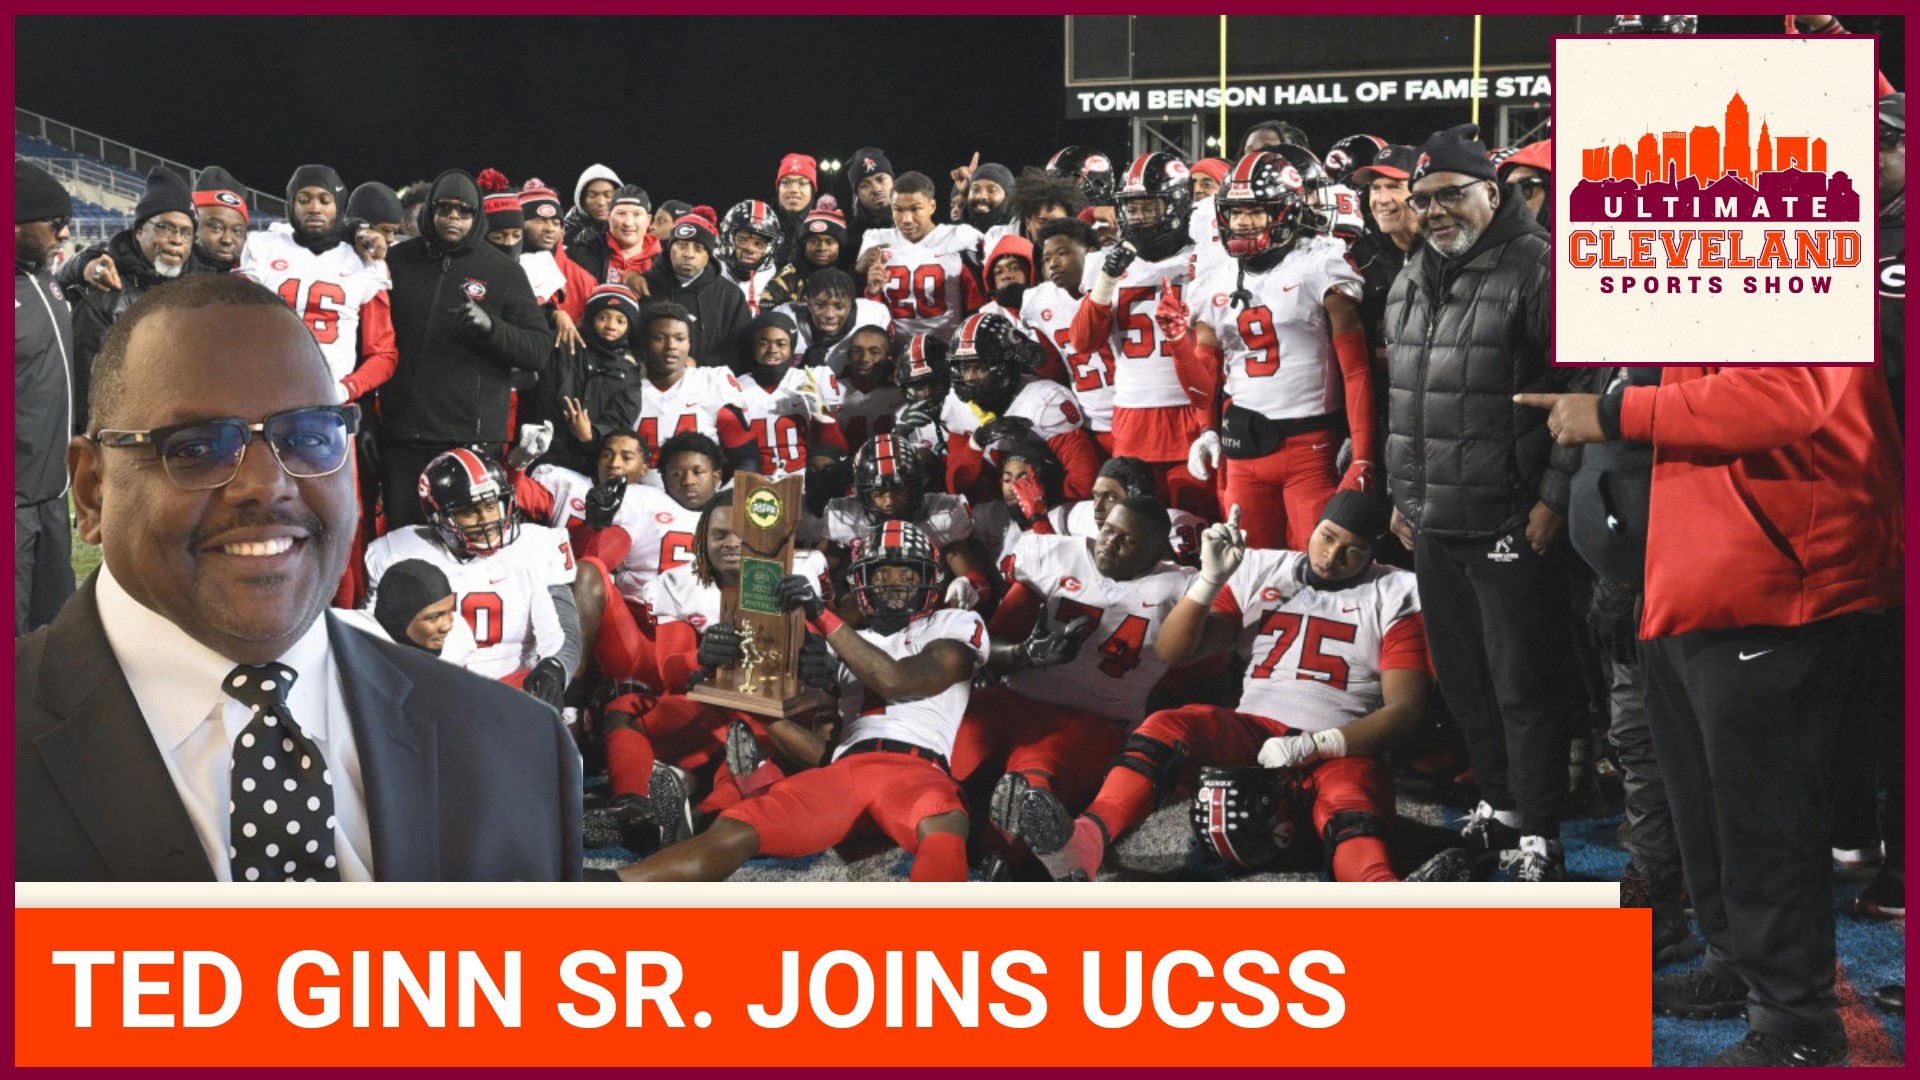 Coach Ted Ginn Sr. makes UCSS debut